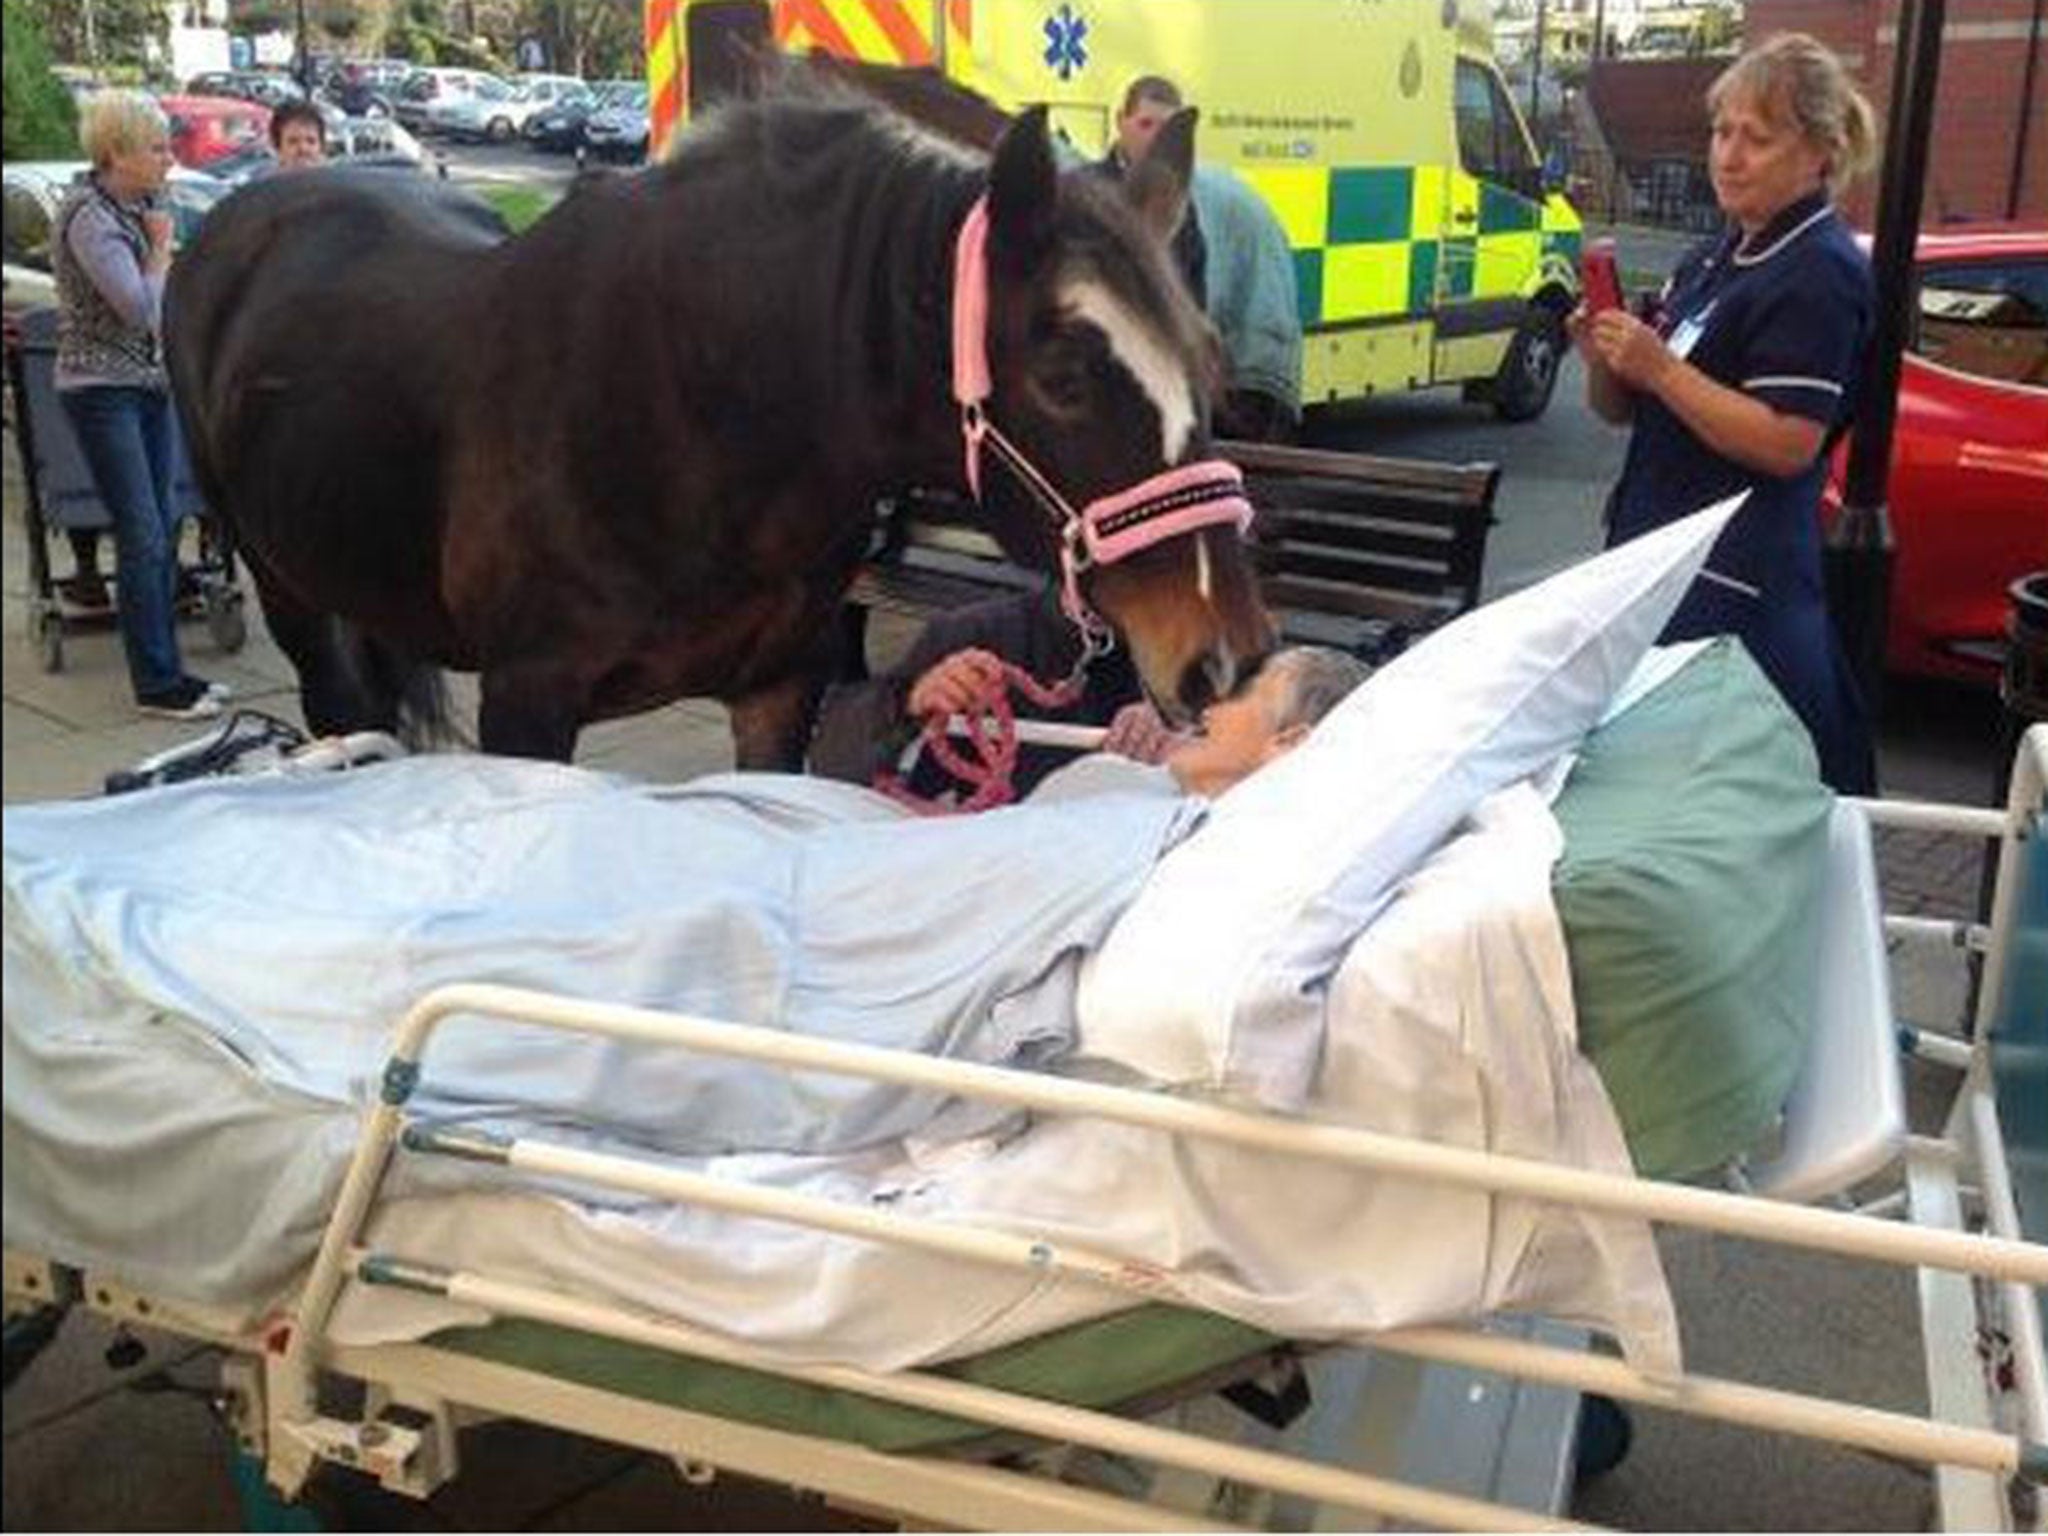 A photo of Sheila Marsh saying goodbye to her horse was released by the hospital trust